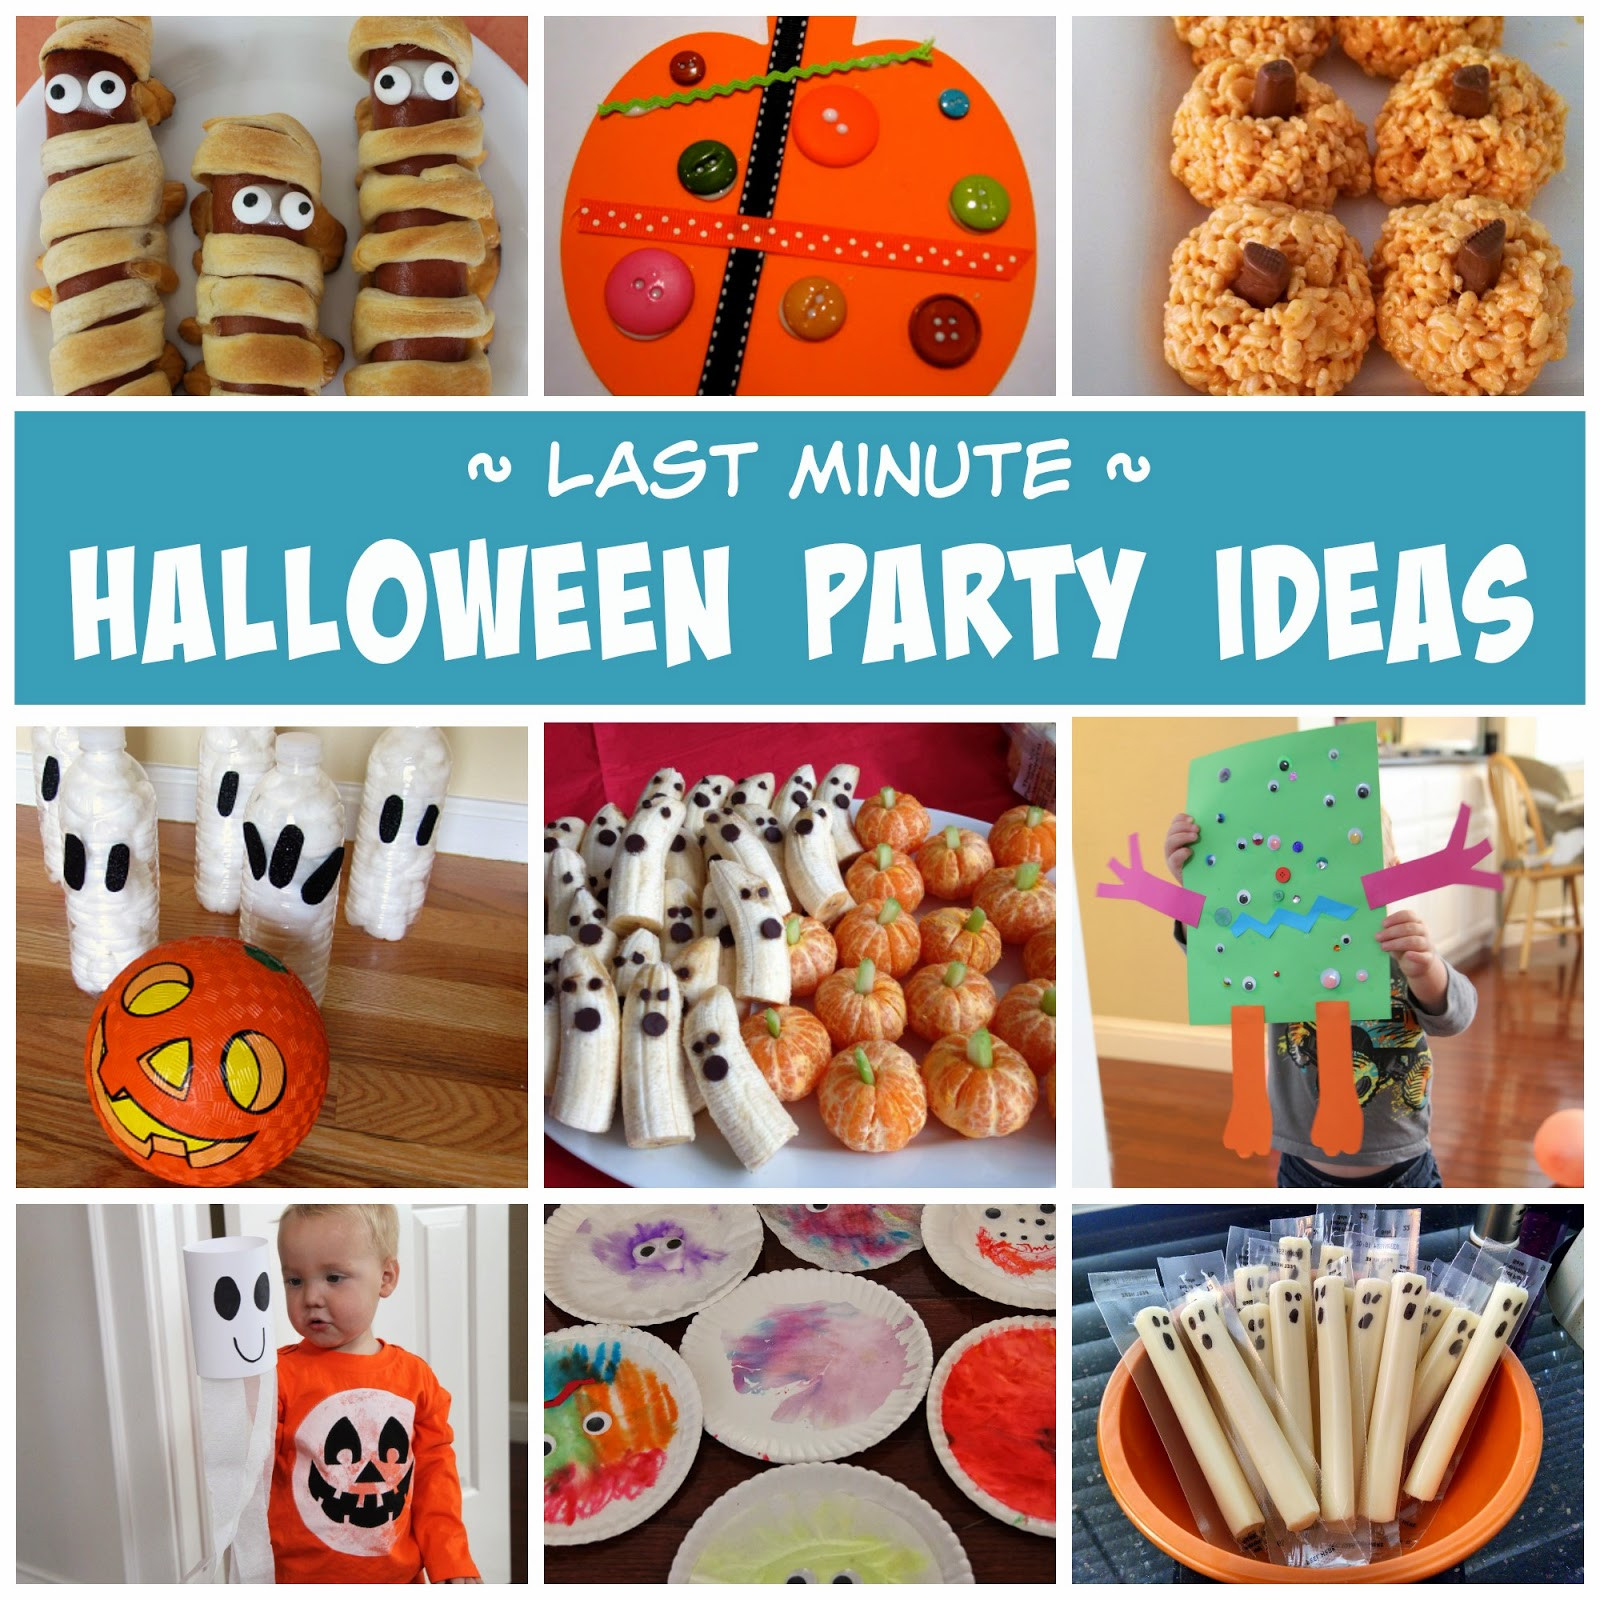 Kids Party Ideas For Halloween
 Toddler Approved Last Minute Halloween Party Ideas